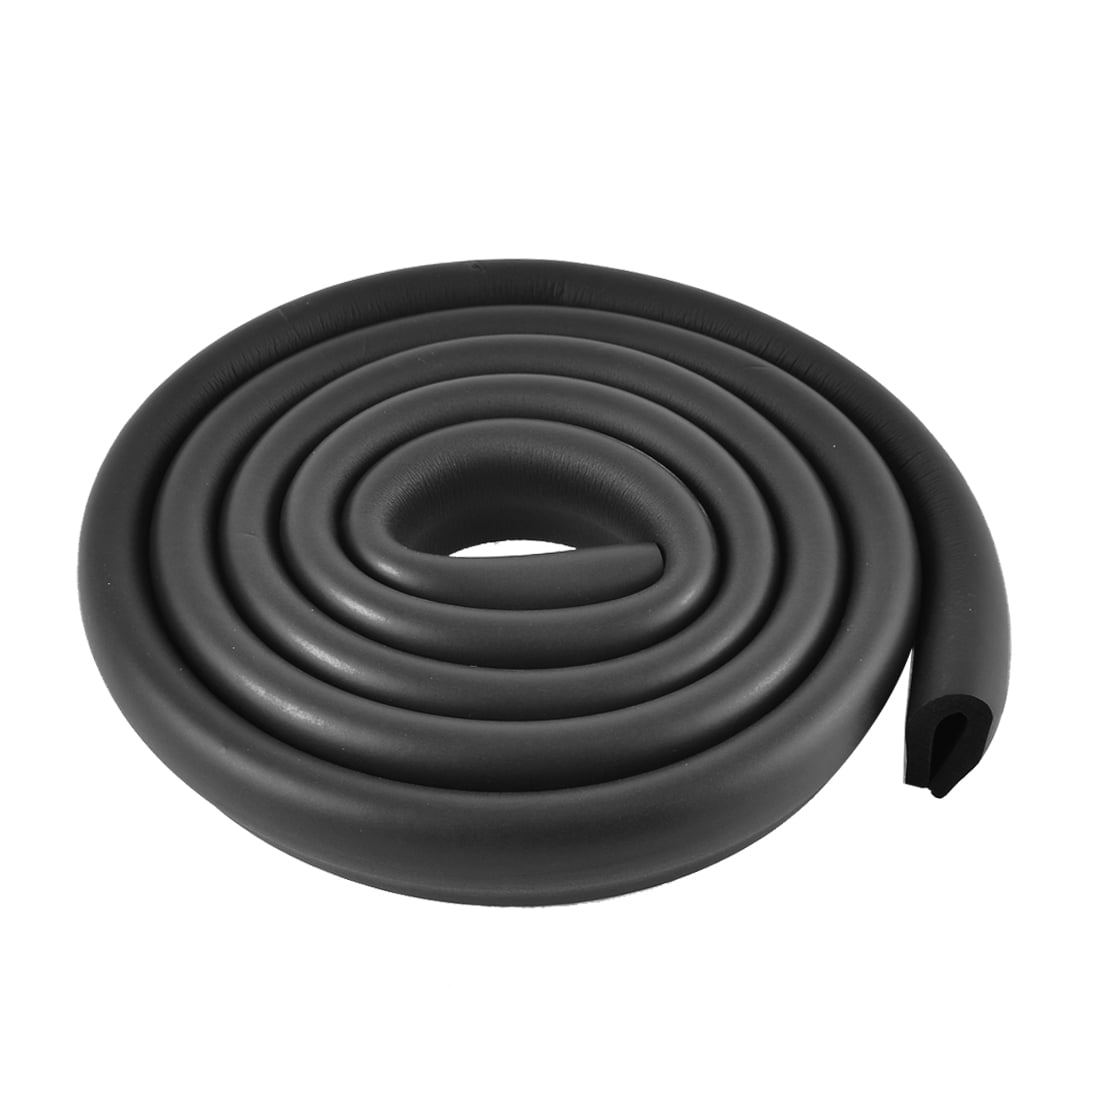 Table Corner Softener Safety Protection Cushion Guard 2M Long Black